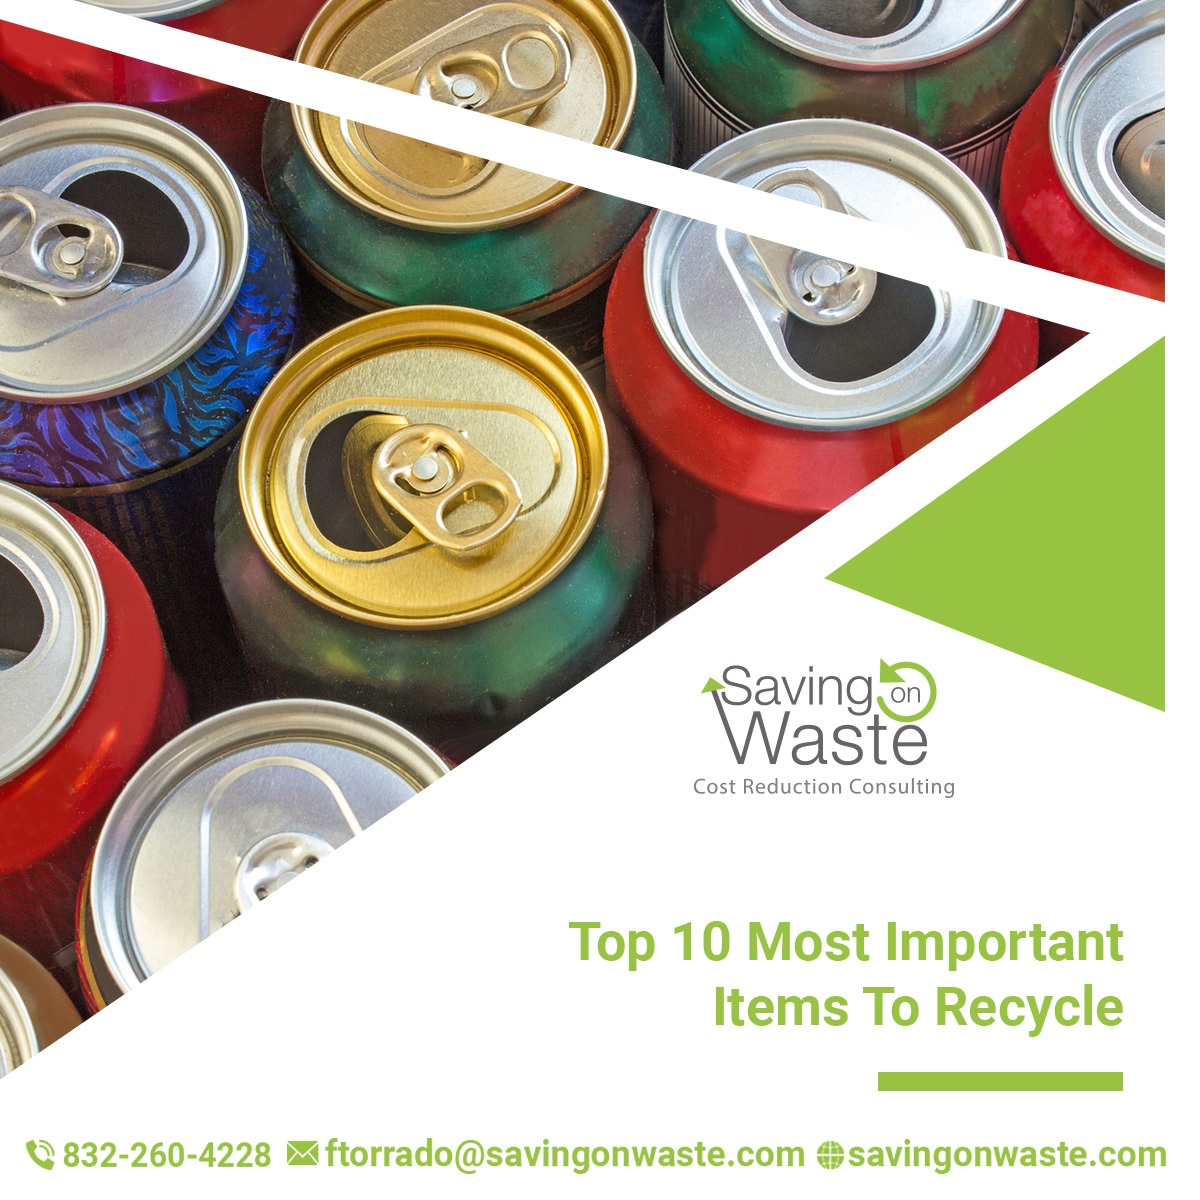 29 Top 10 Most Important Items To Recycle